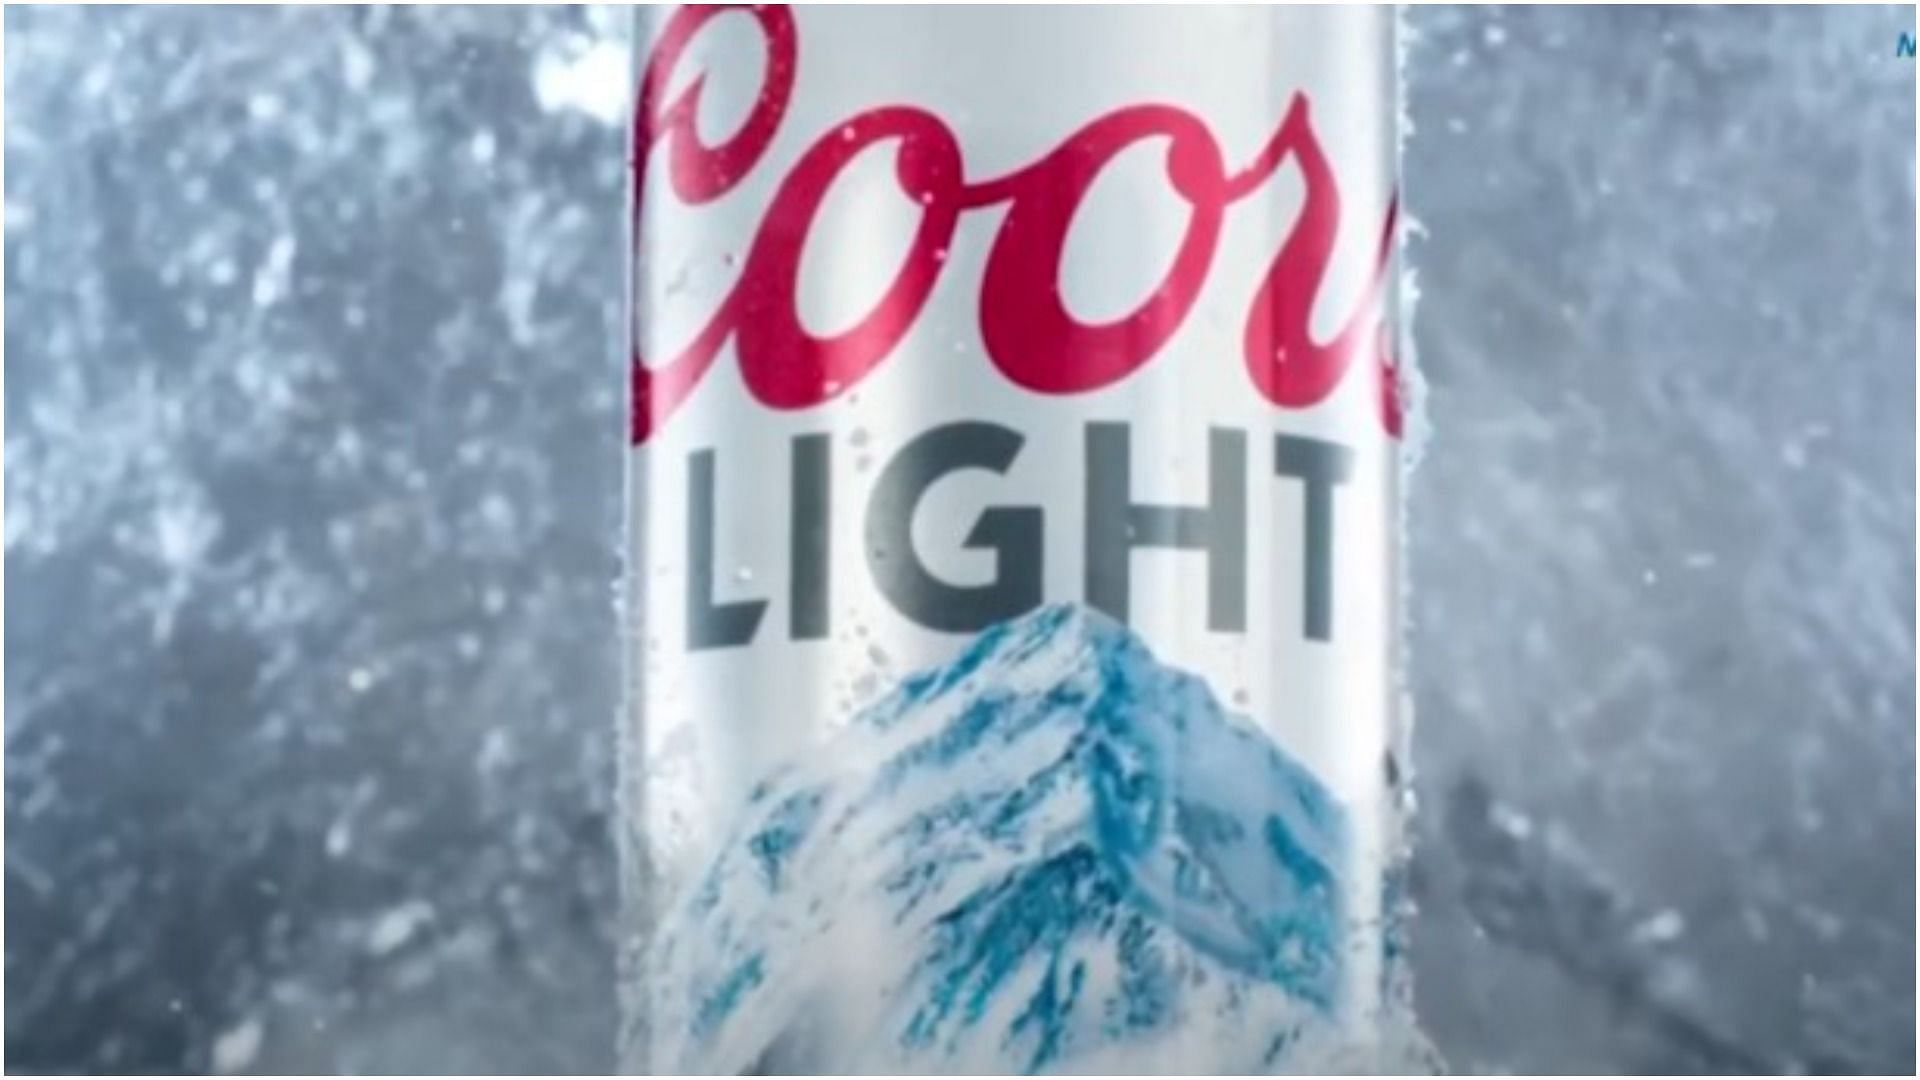 Beer recall 2022: Brand, list of products explored amid social media controversy (Image via @YouTube/CoorBreweryTour)